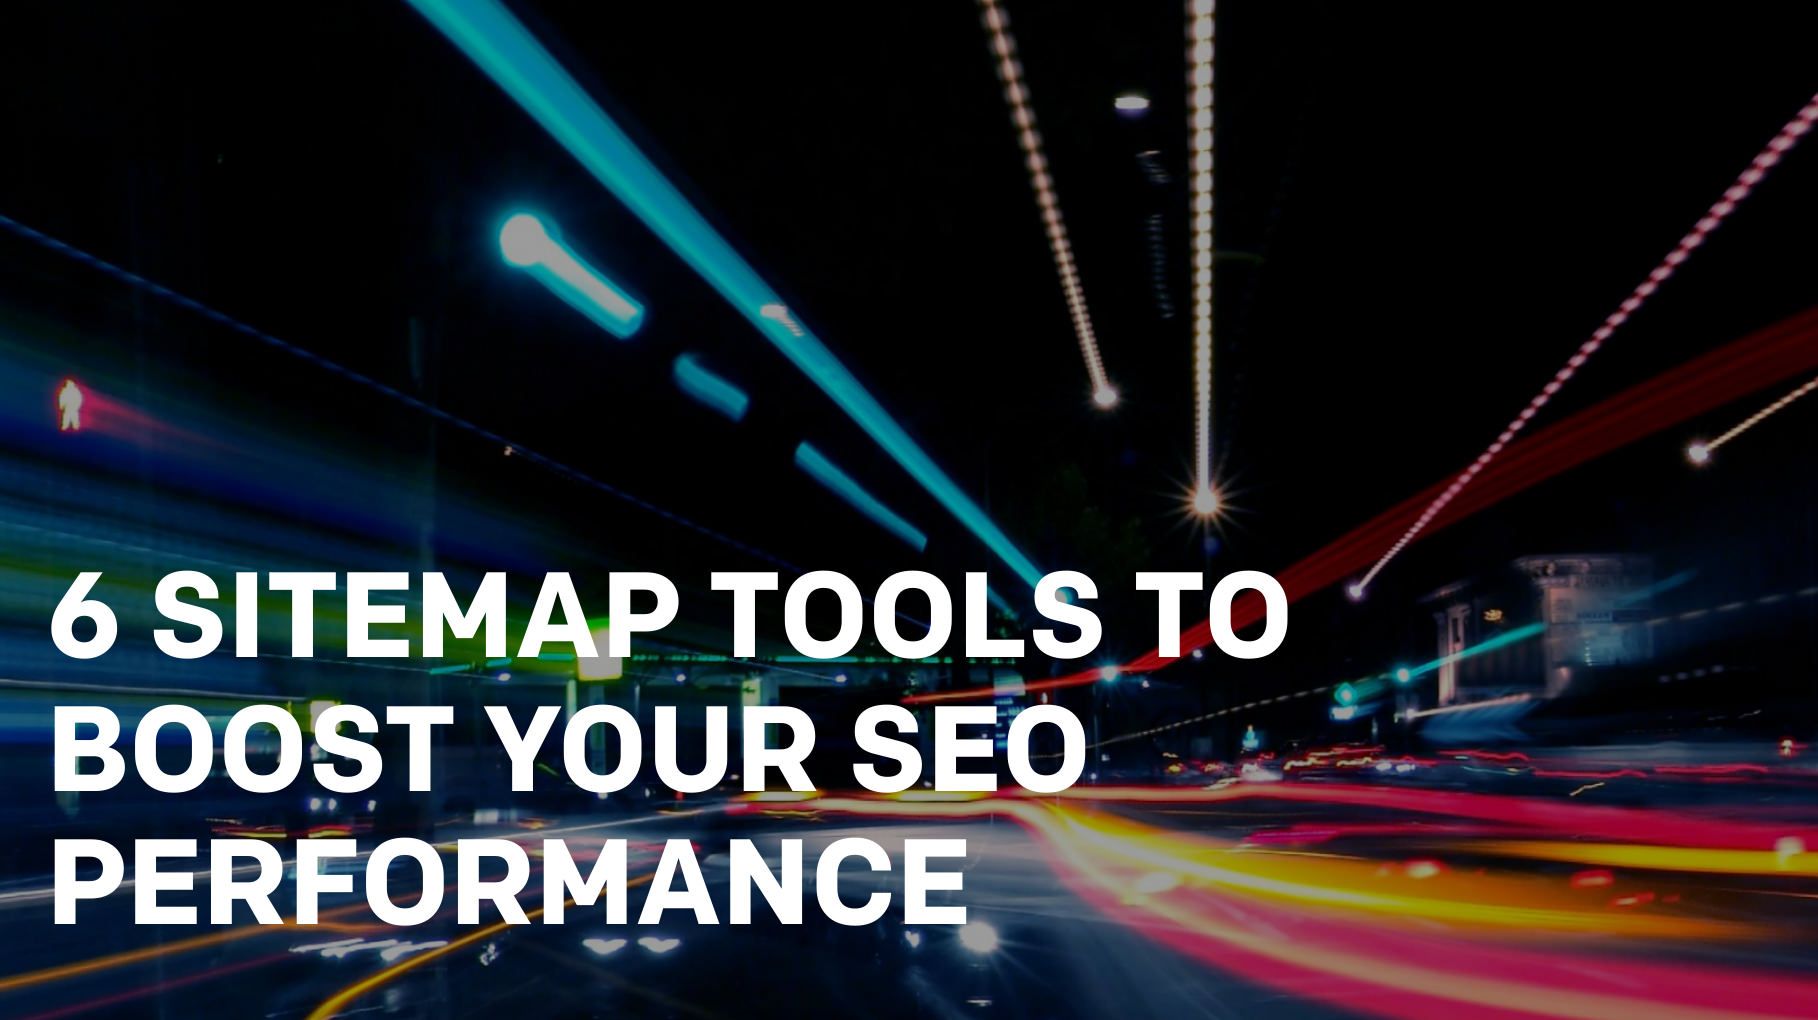 6 sitemap tools to boost your SEO performance